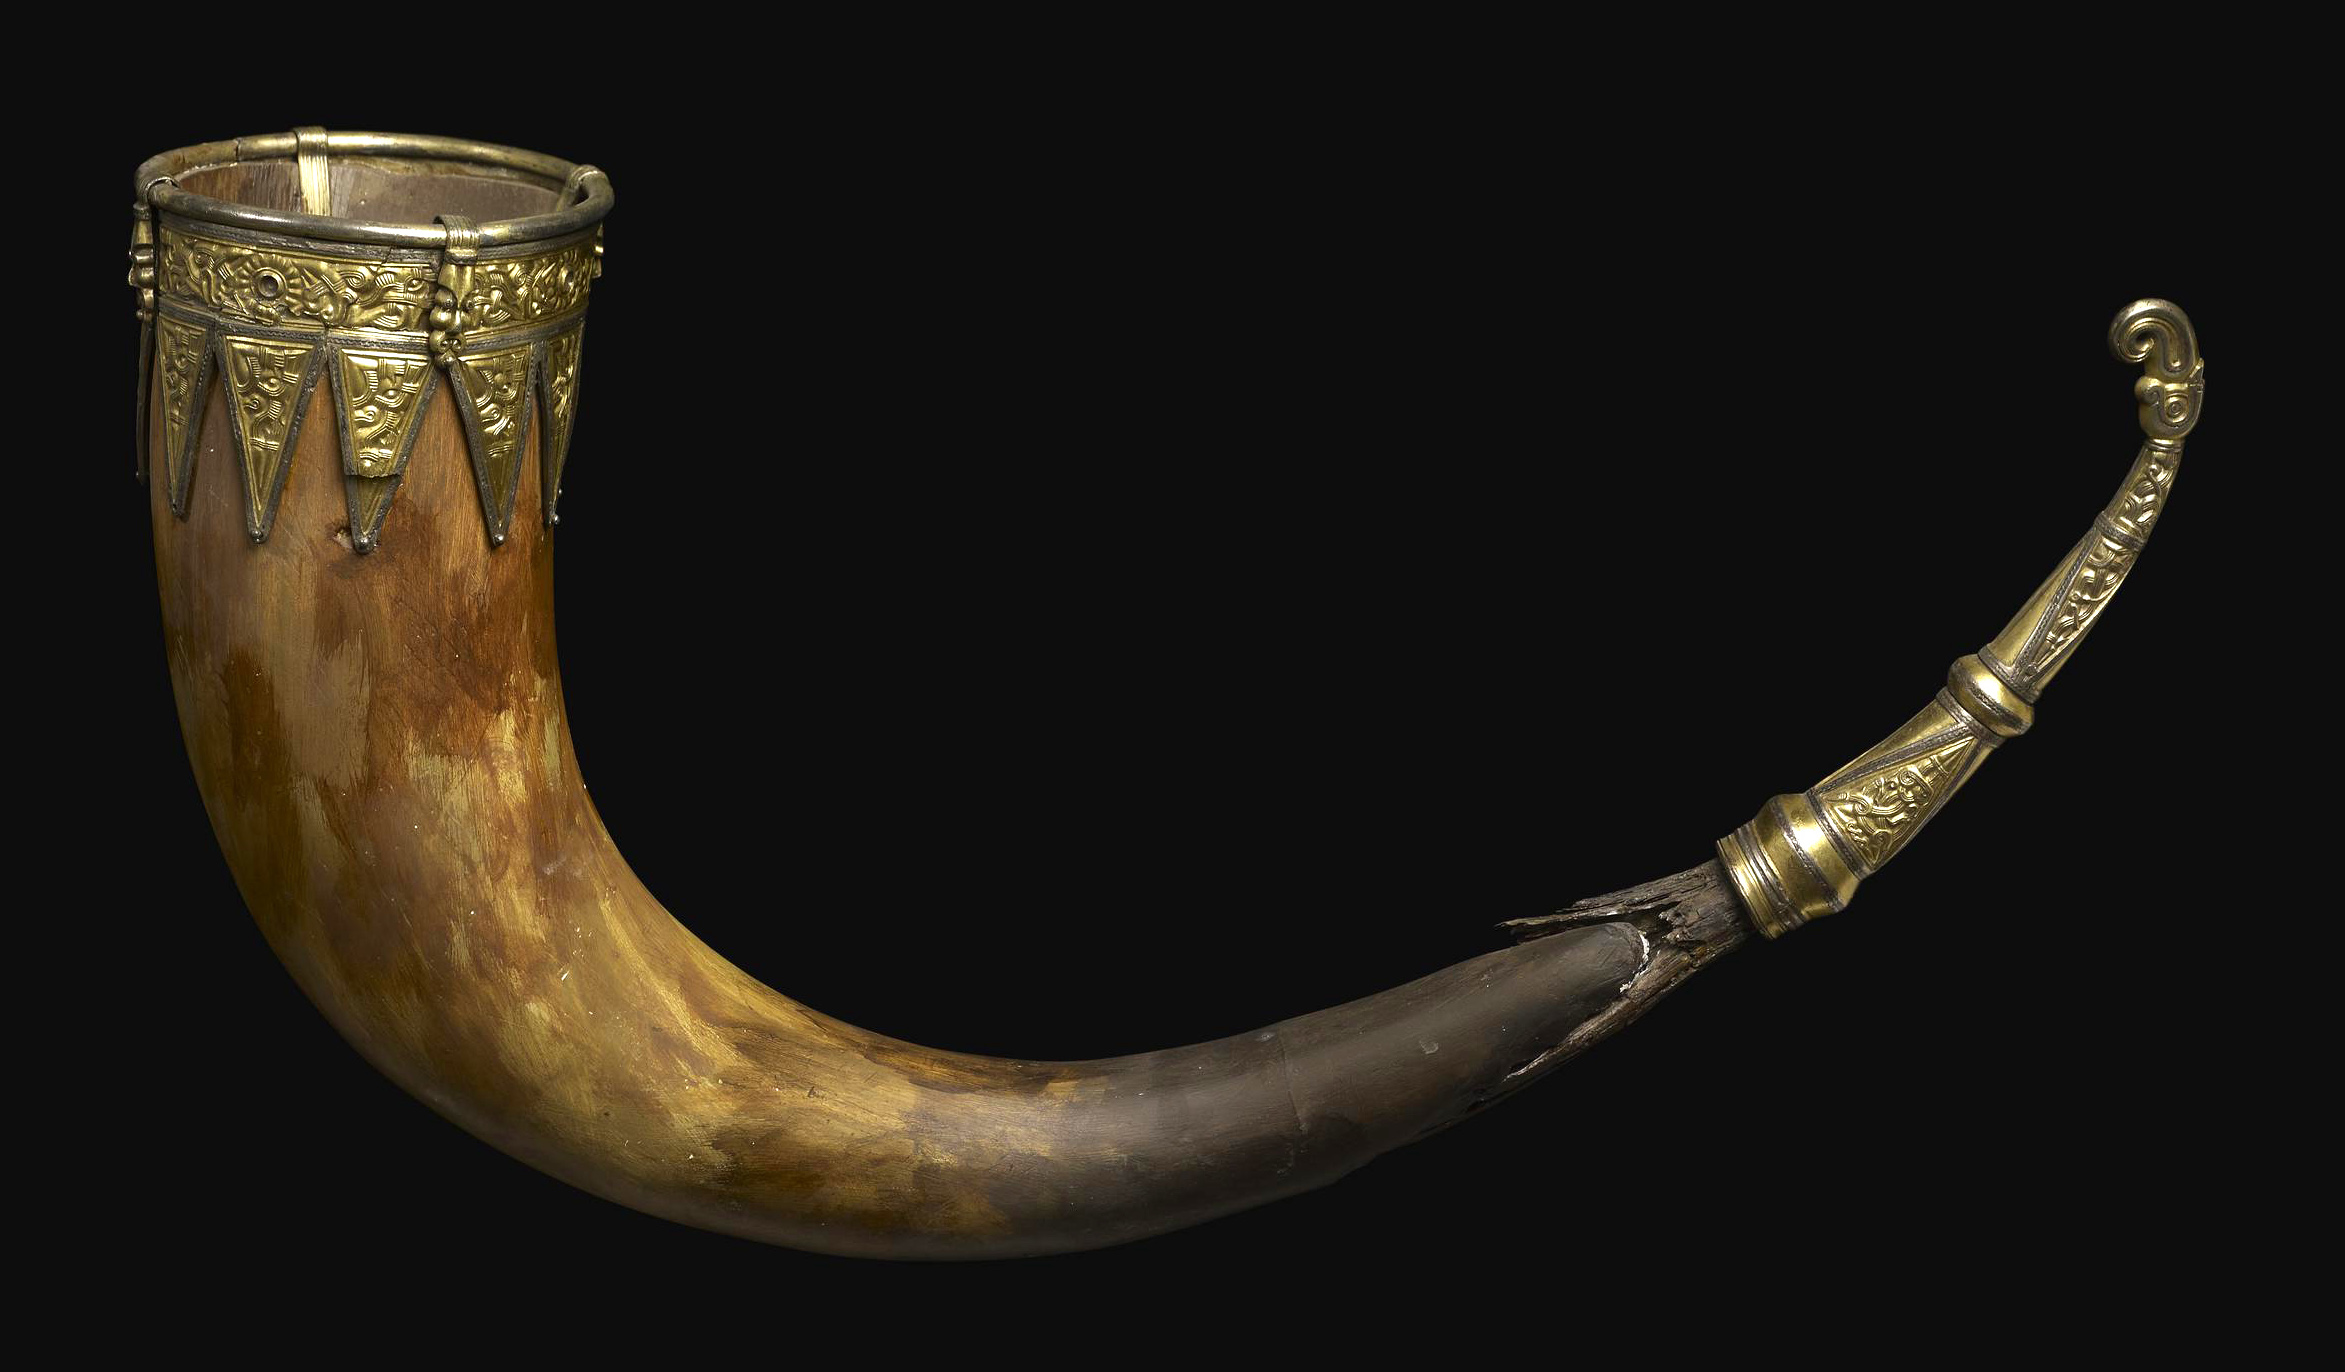 Drinking Horn Mounts. Taplow, Buckinghamshire, England. The British Museum, London, 1883,1214.19. Photo: © The Trustees of the British Museum (CC BY-NC-SA).